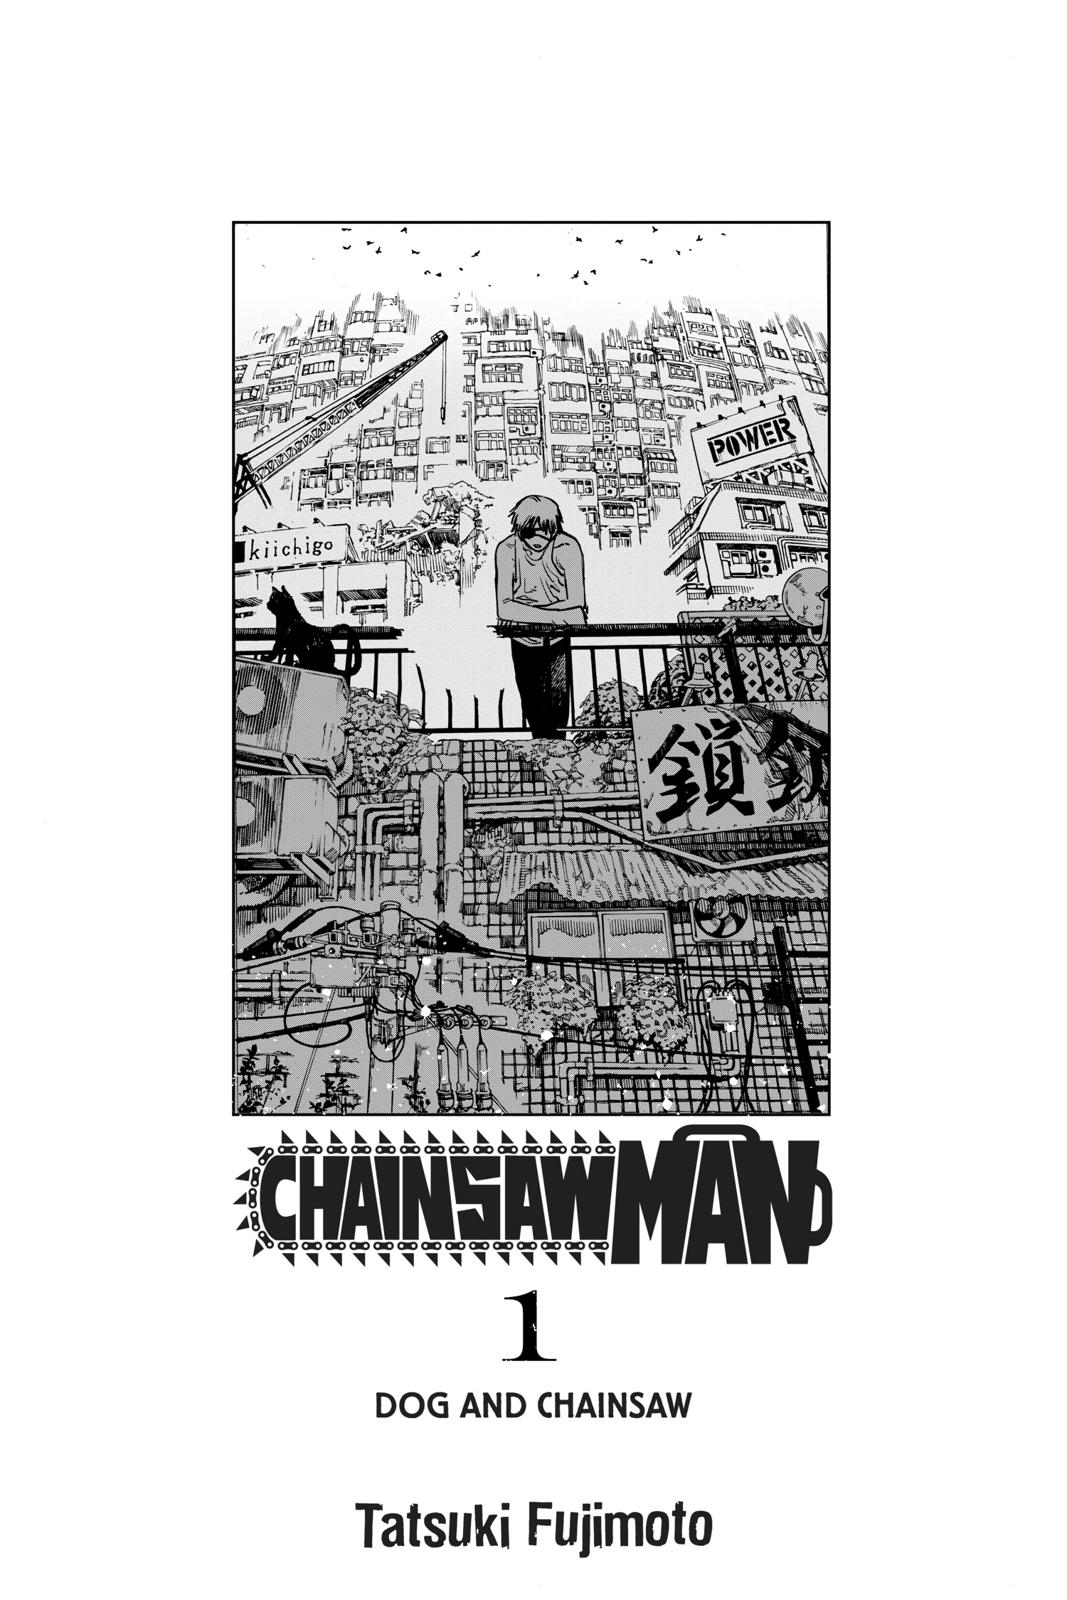 read chainsaw man manga chapter 1 Dog & Chainsaw online in high quality